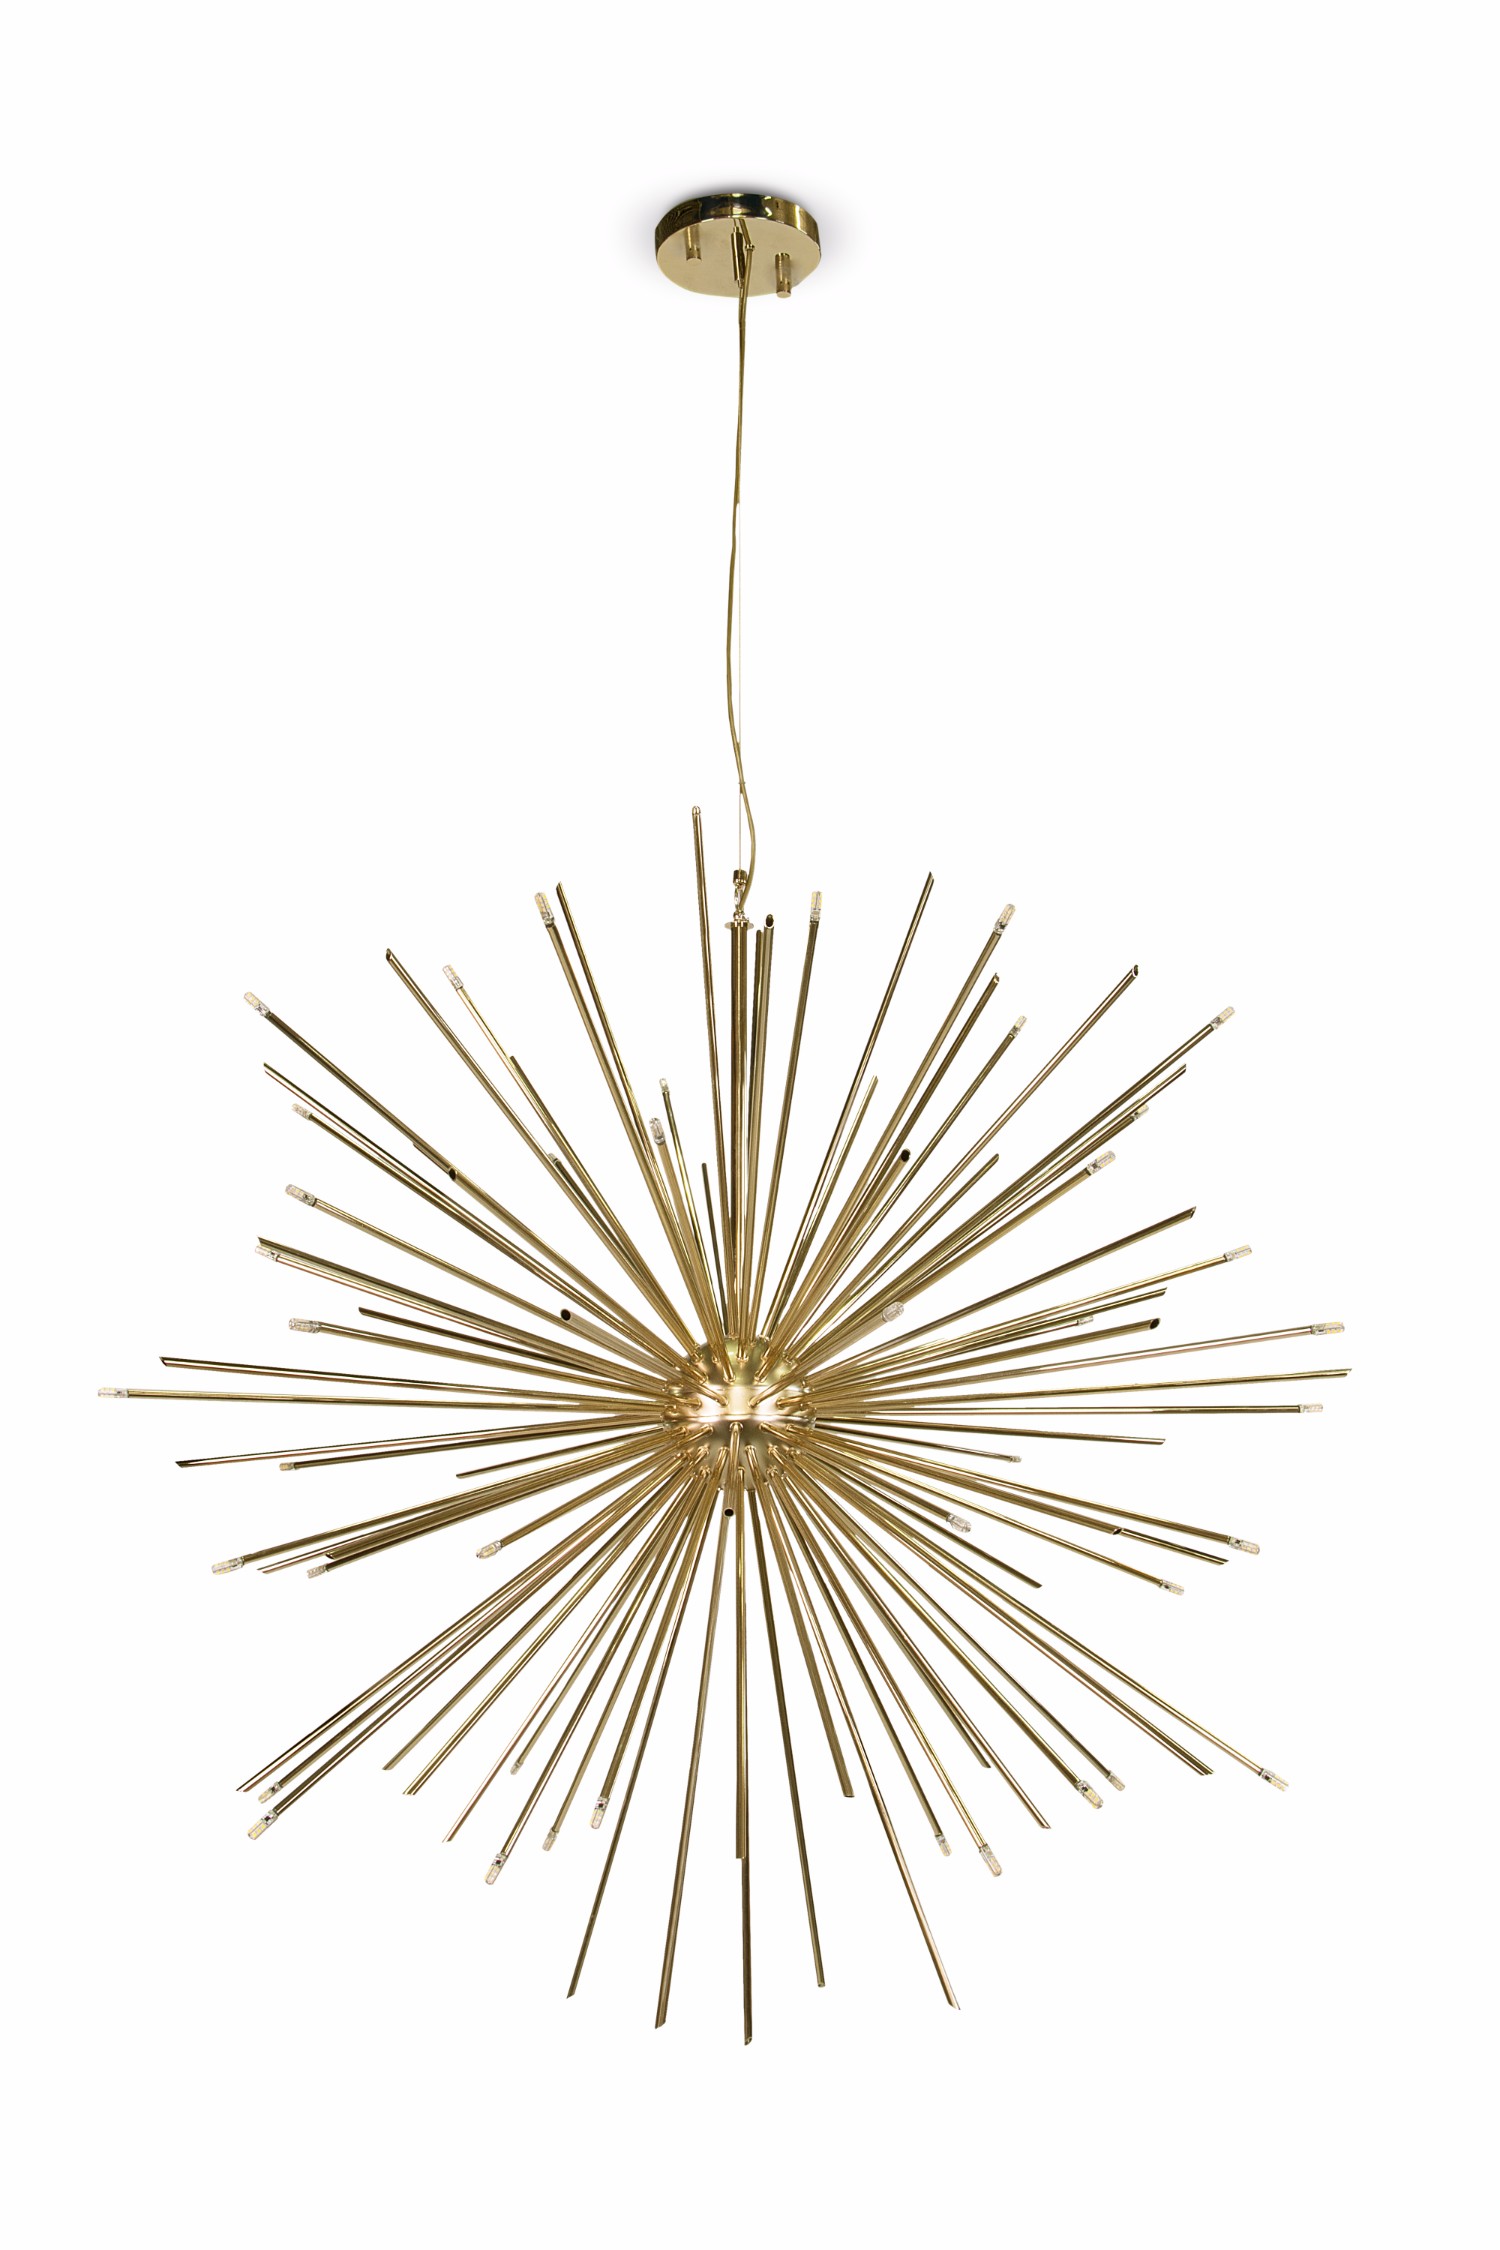 Dining Room Chandeliers to Brighten Up Your Thanksgiving Decorations 3